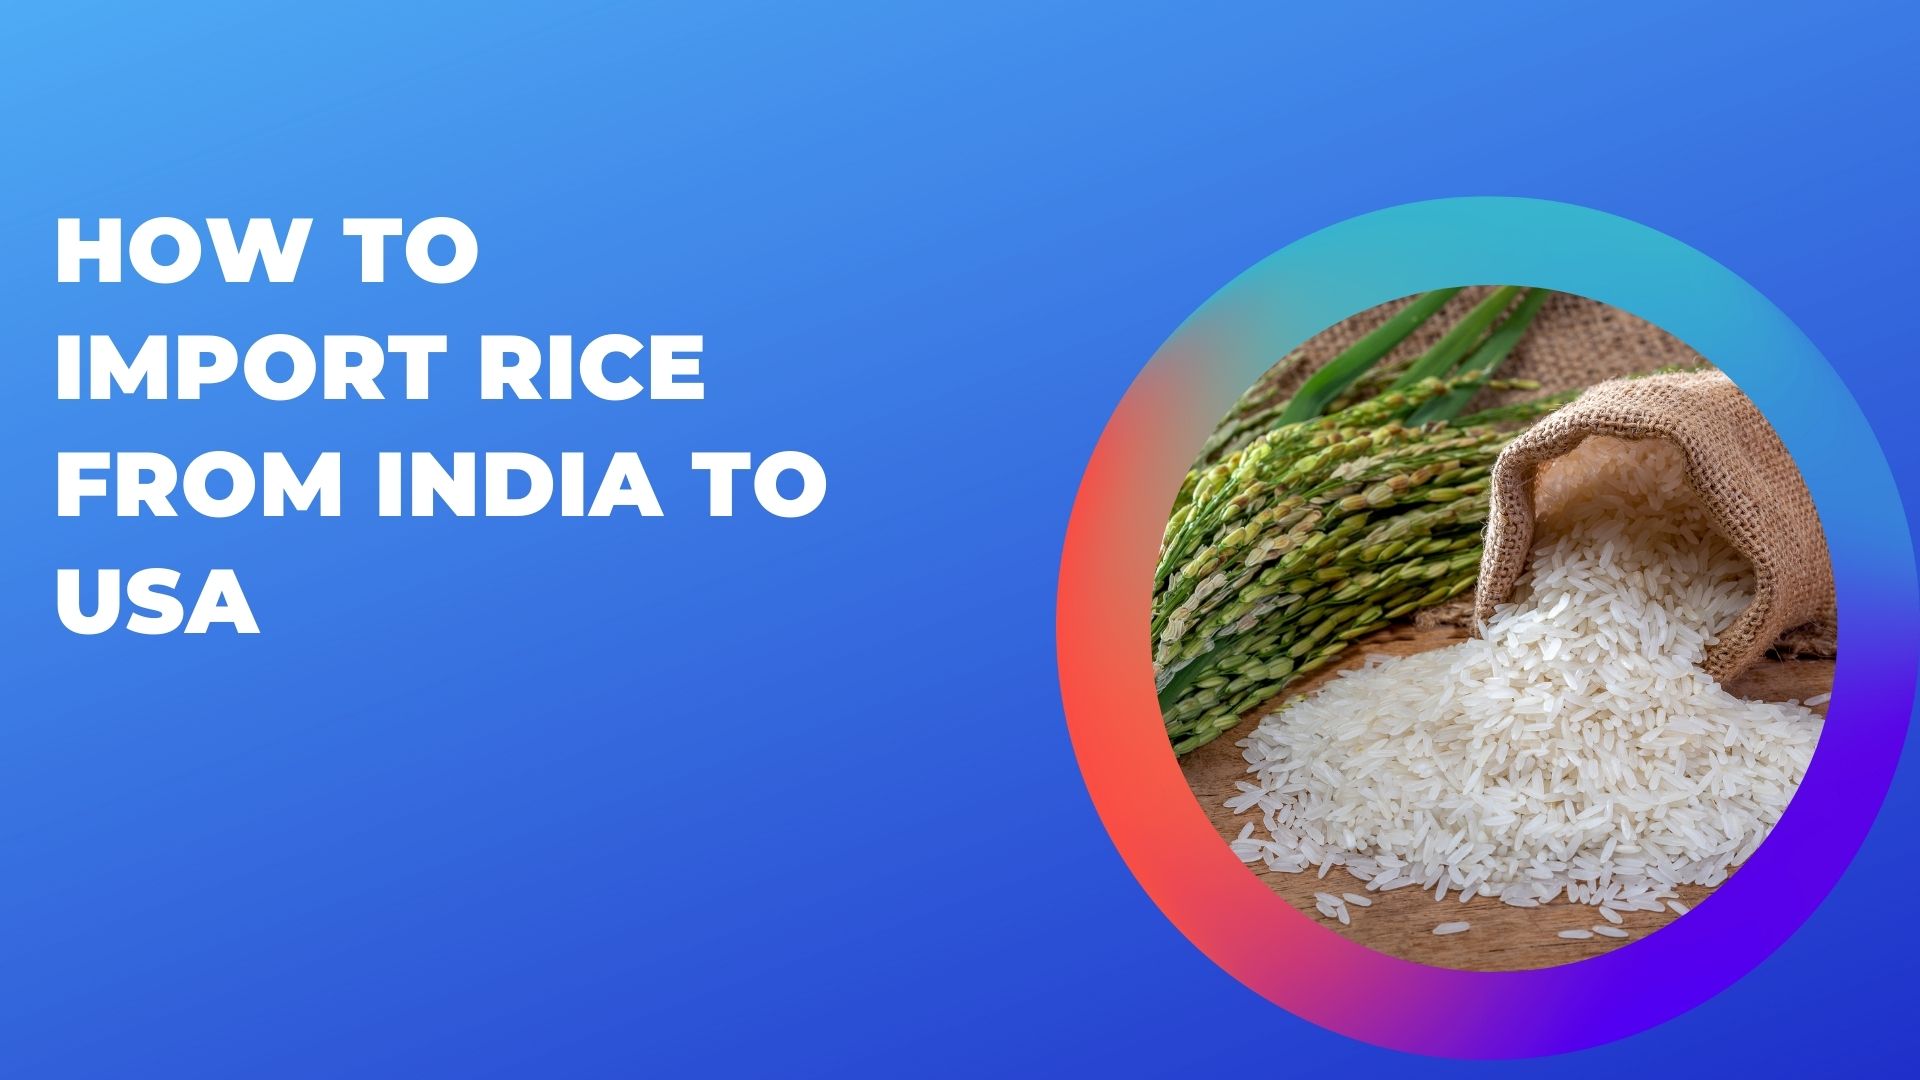 How to Import Rice from India to USA